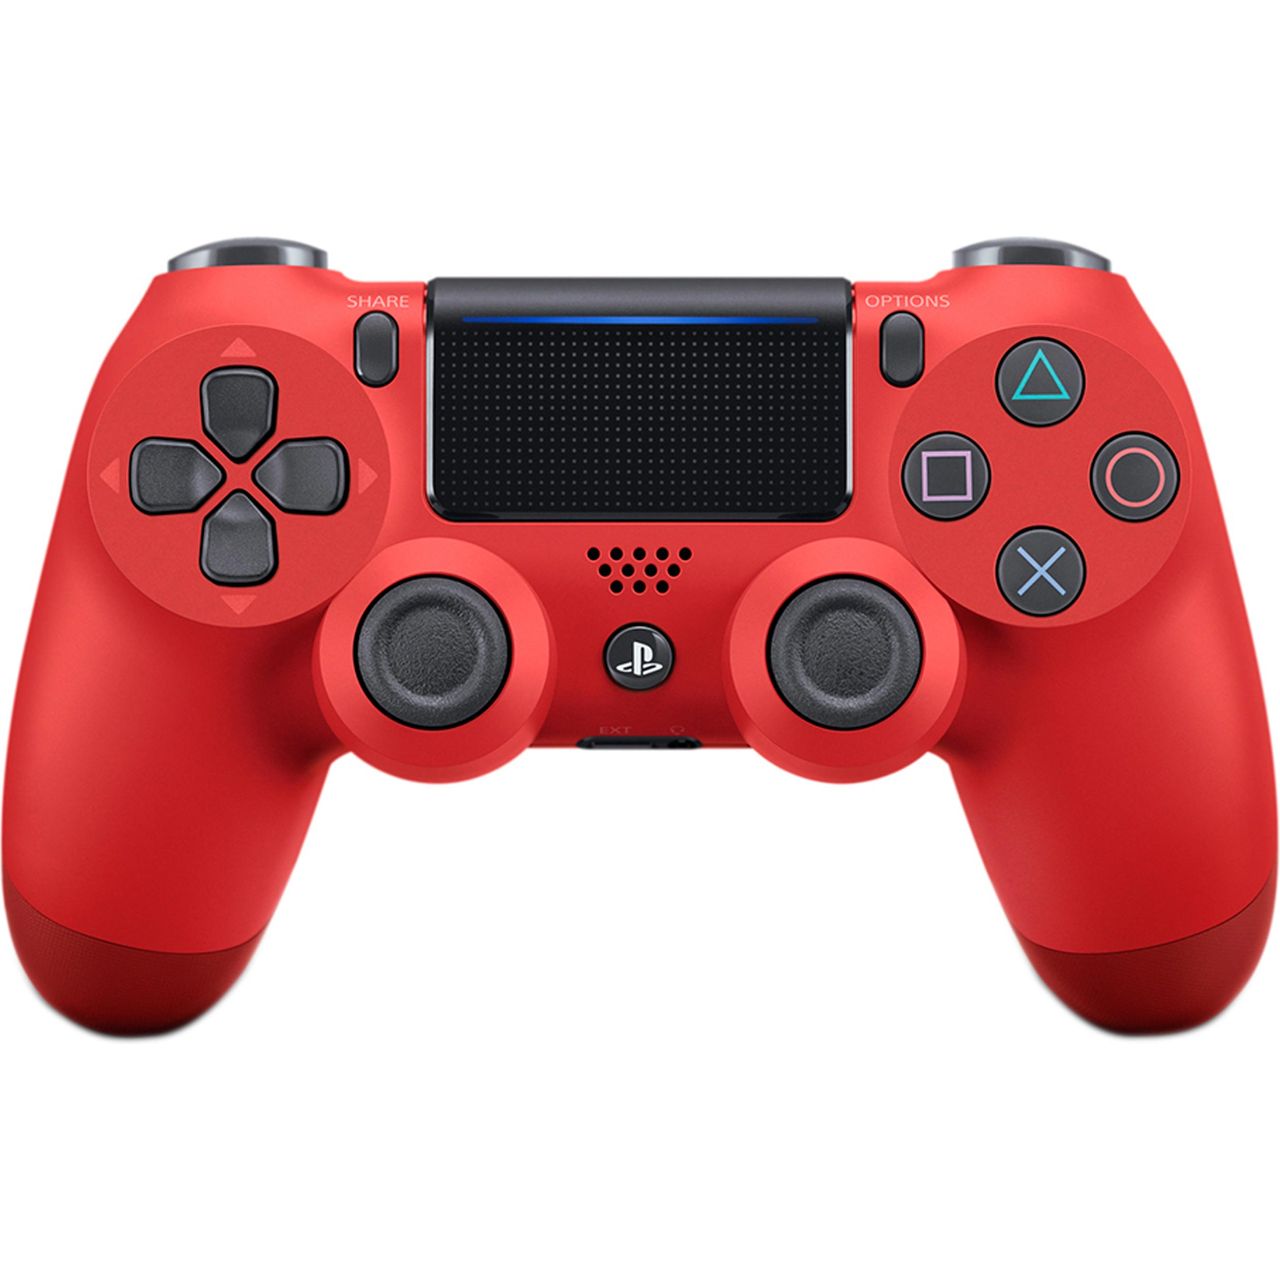 Red Wireless Controllers for PS4 Playstation 4 V2 Dual Shock 